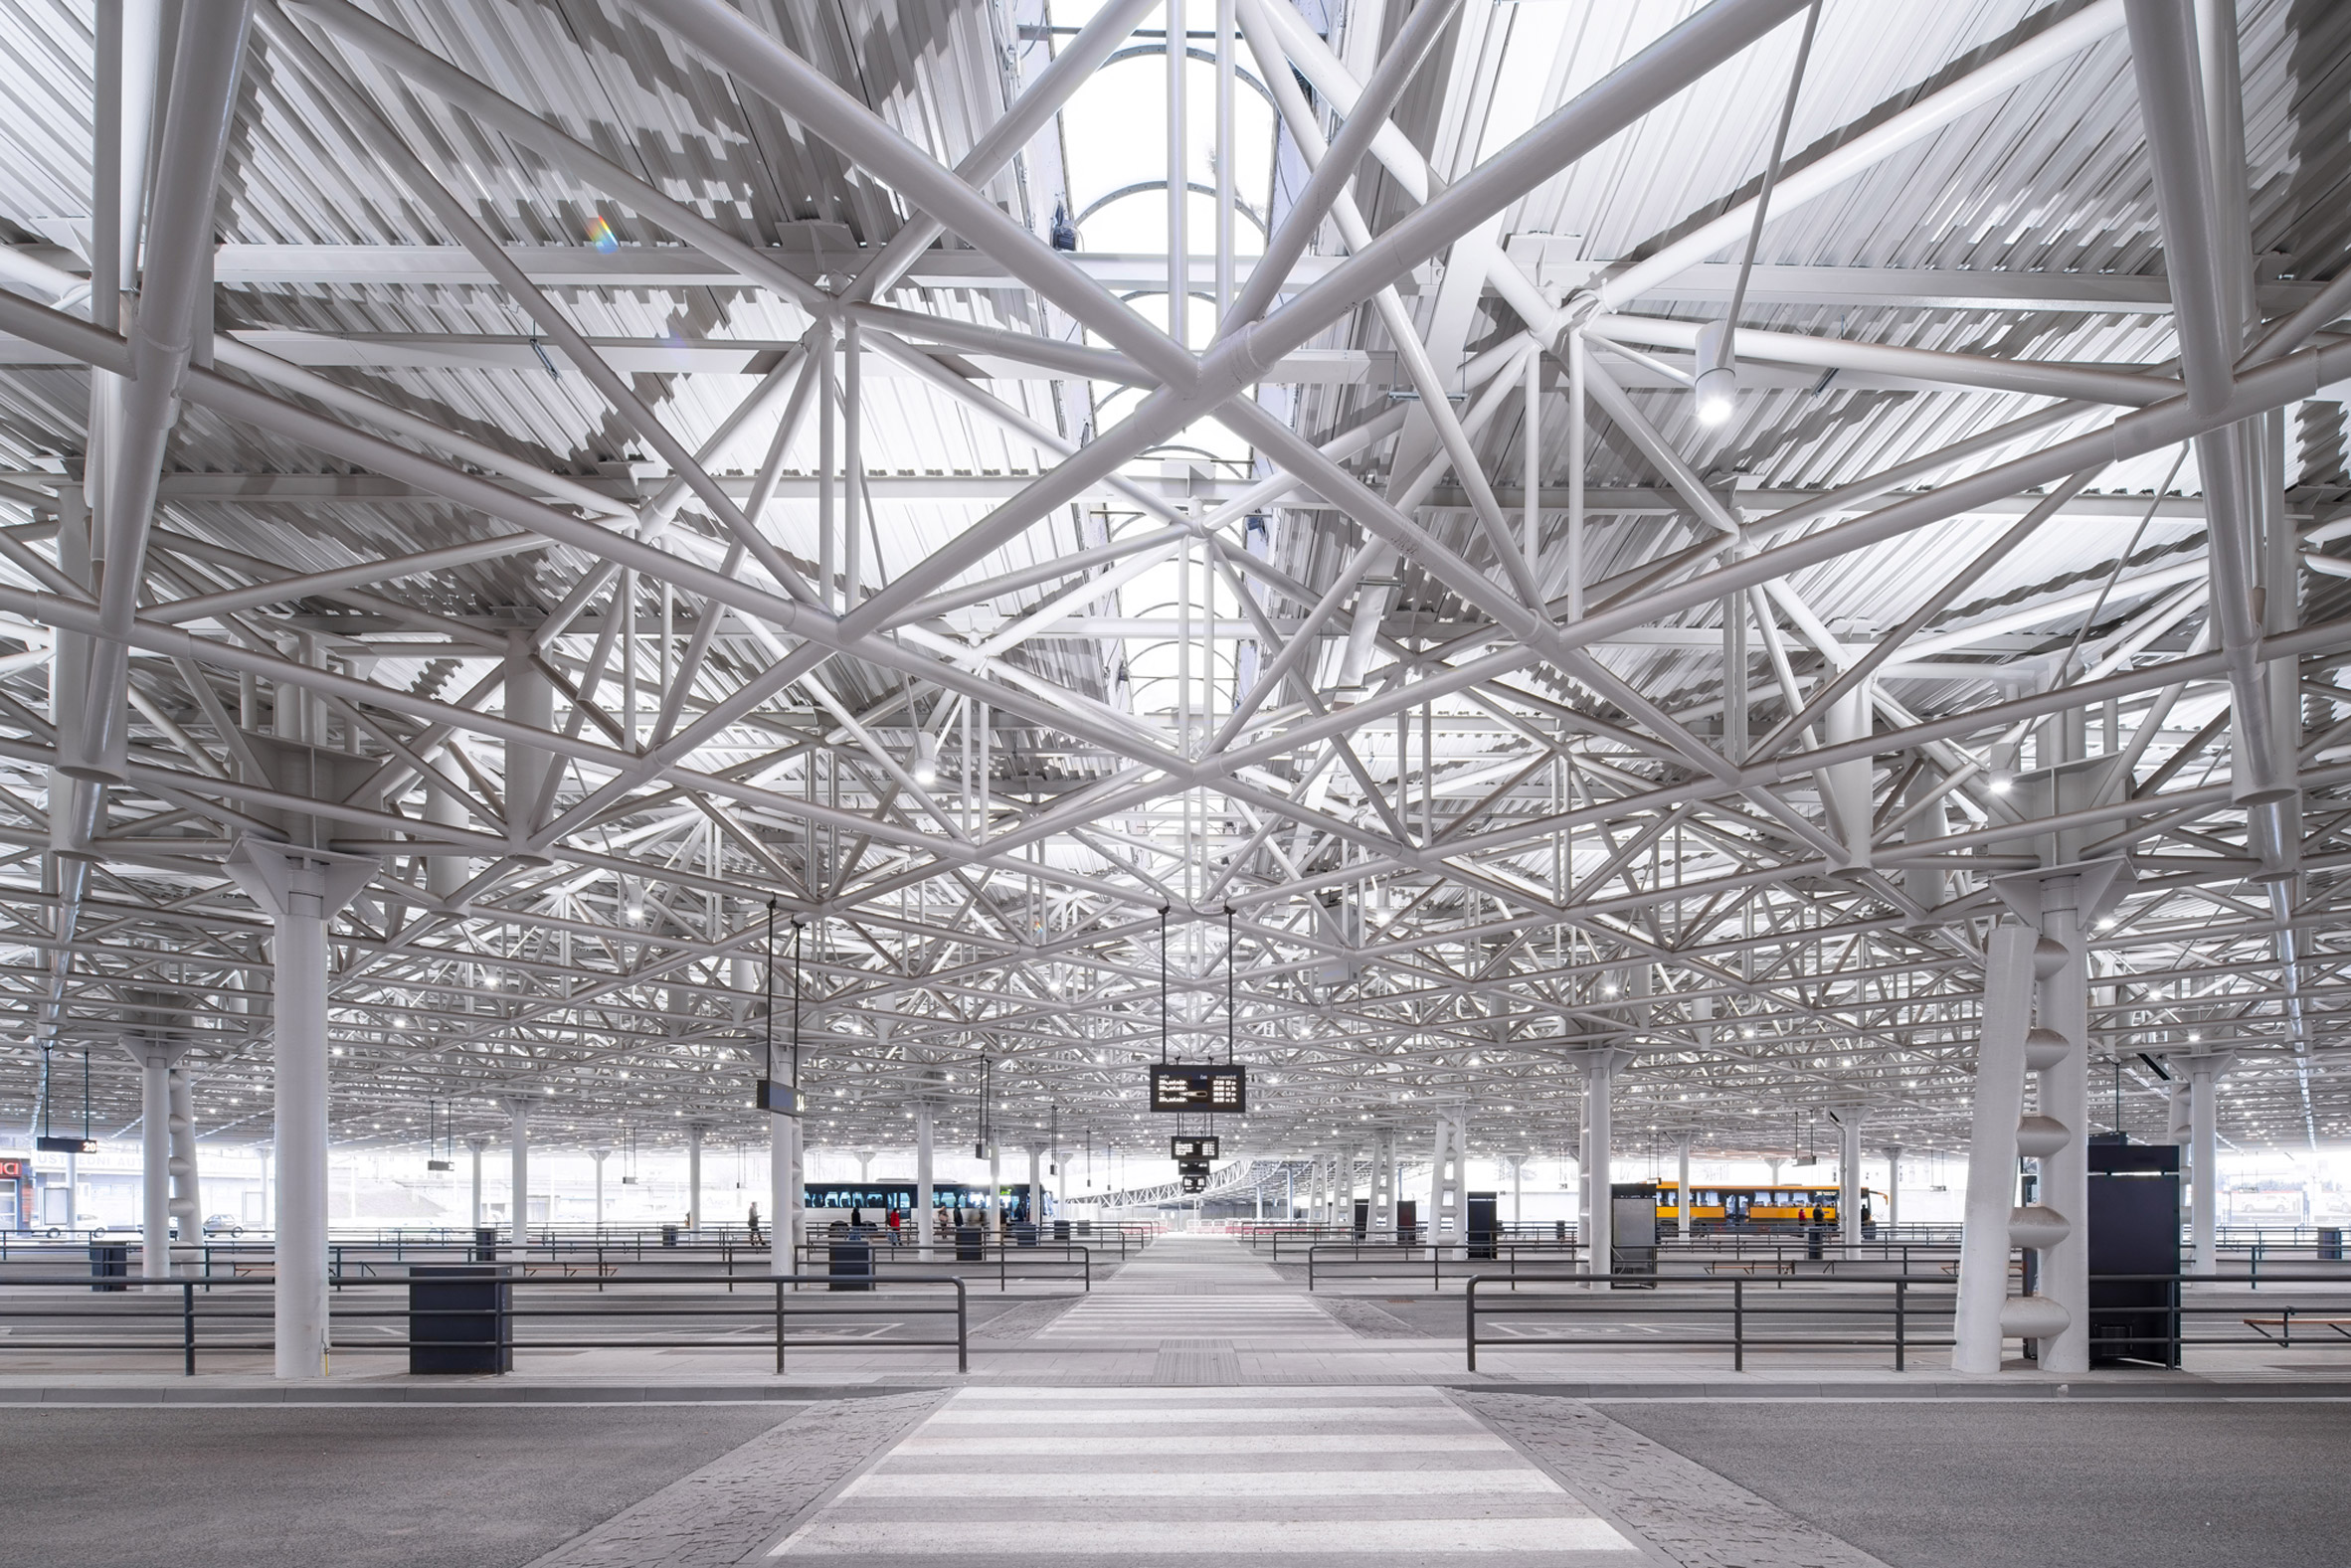 Large columns support a terminal steel roof